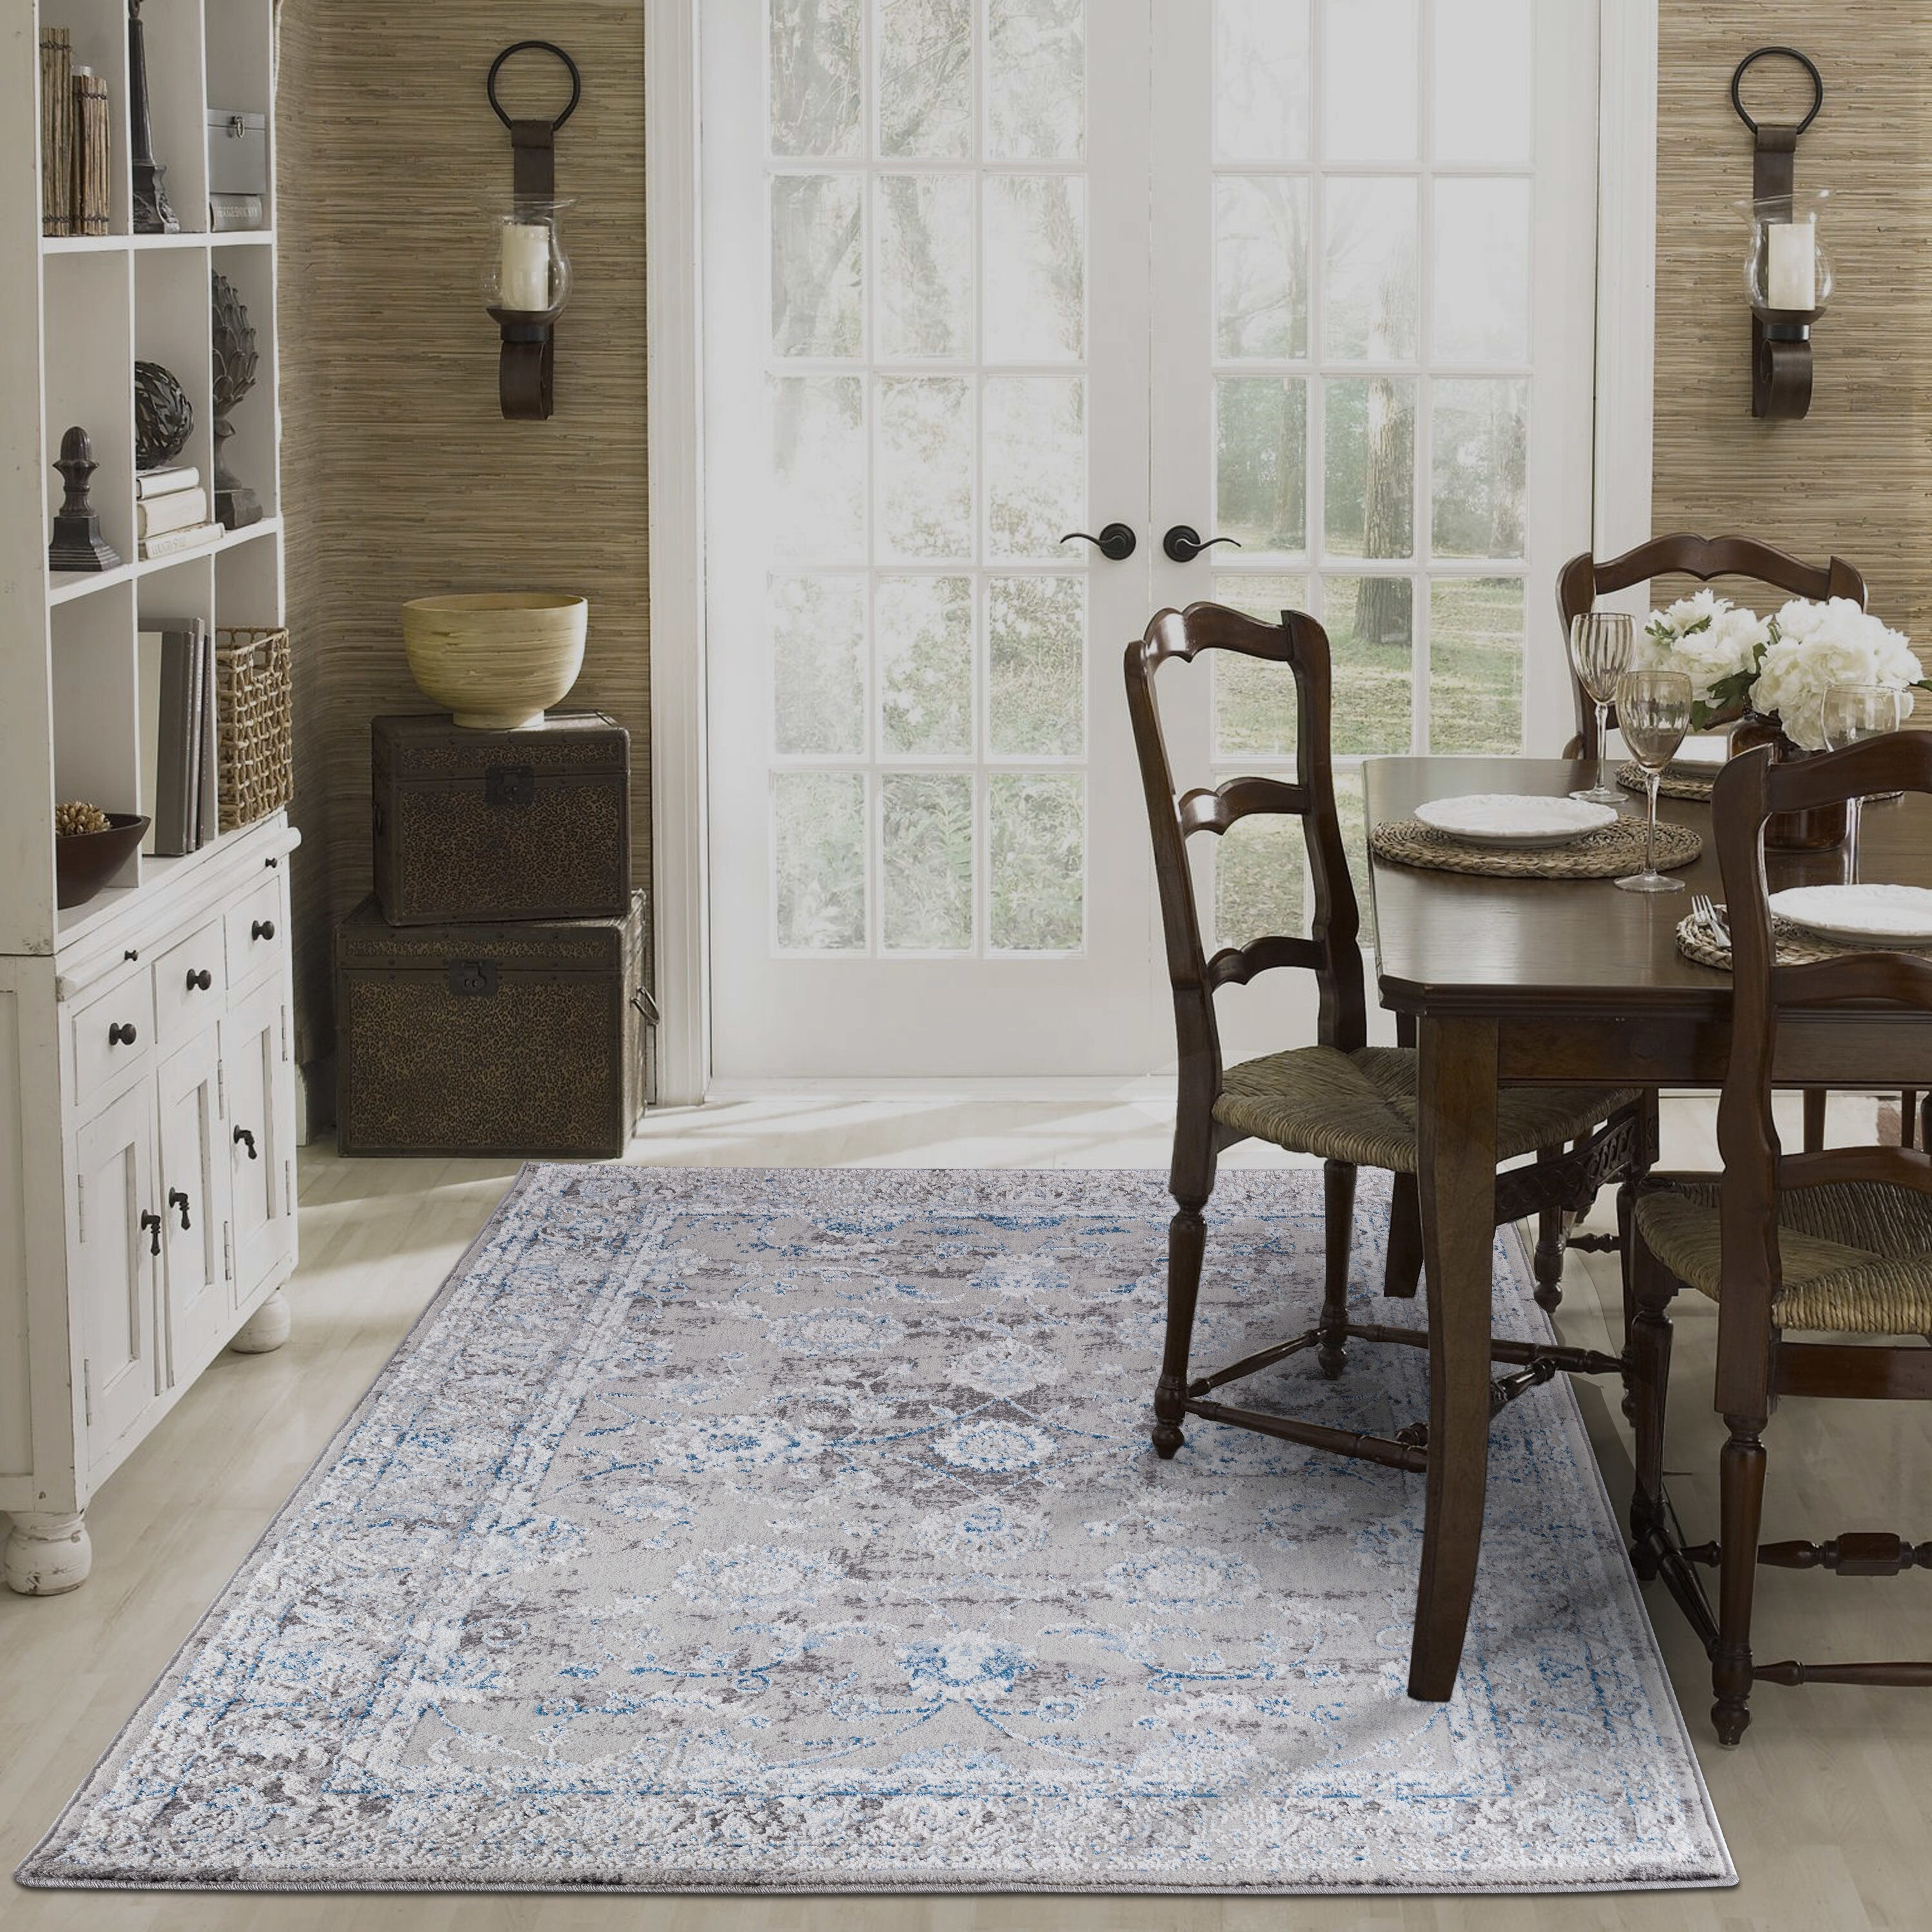 The Sofia Rugs Sofihas 2 Piece Kitchen Rug Sets 60in x 24in x 35in